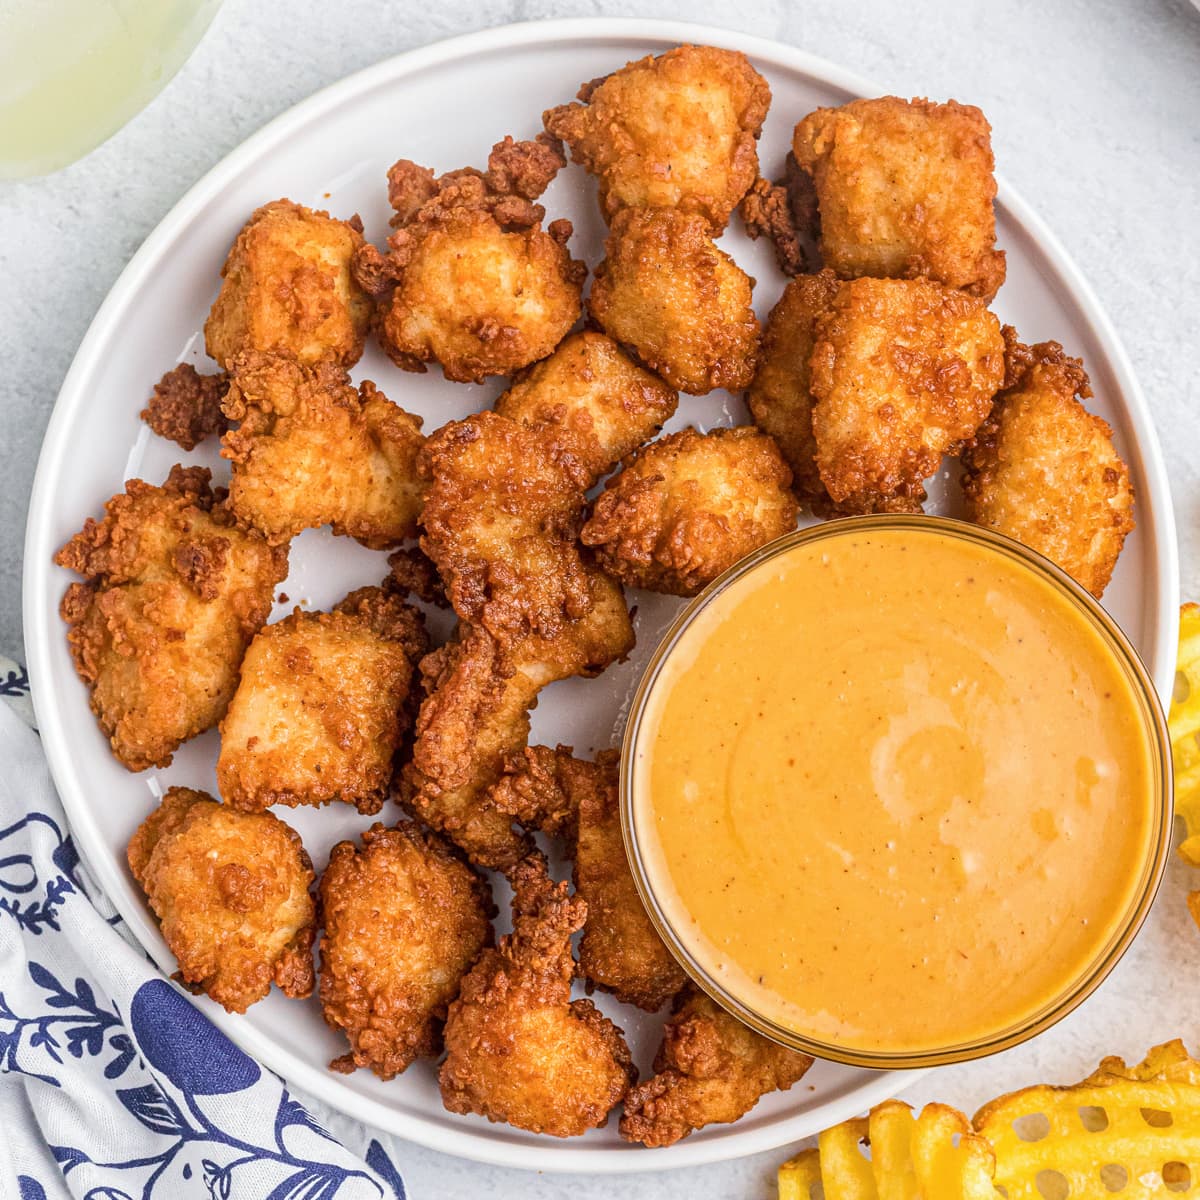 Chick fil a sauce served with chick fil a nuggets.